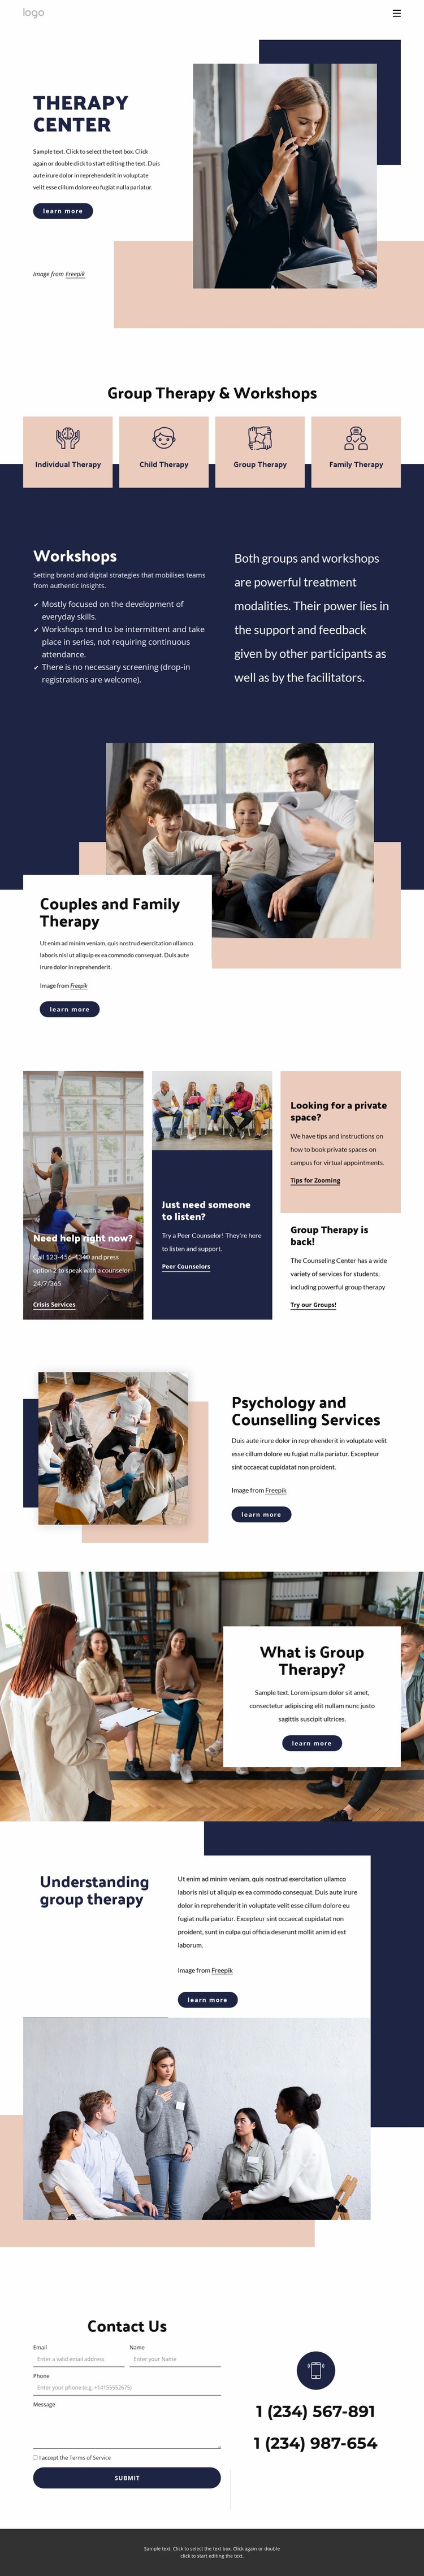 Therapy center Website Mockup